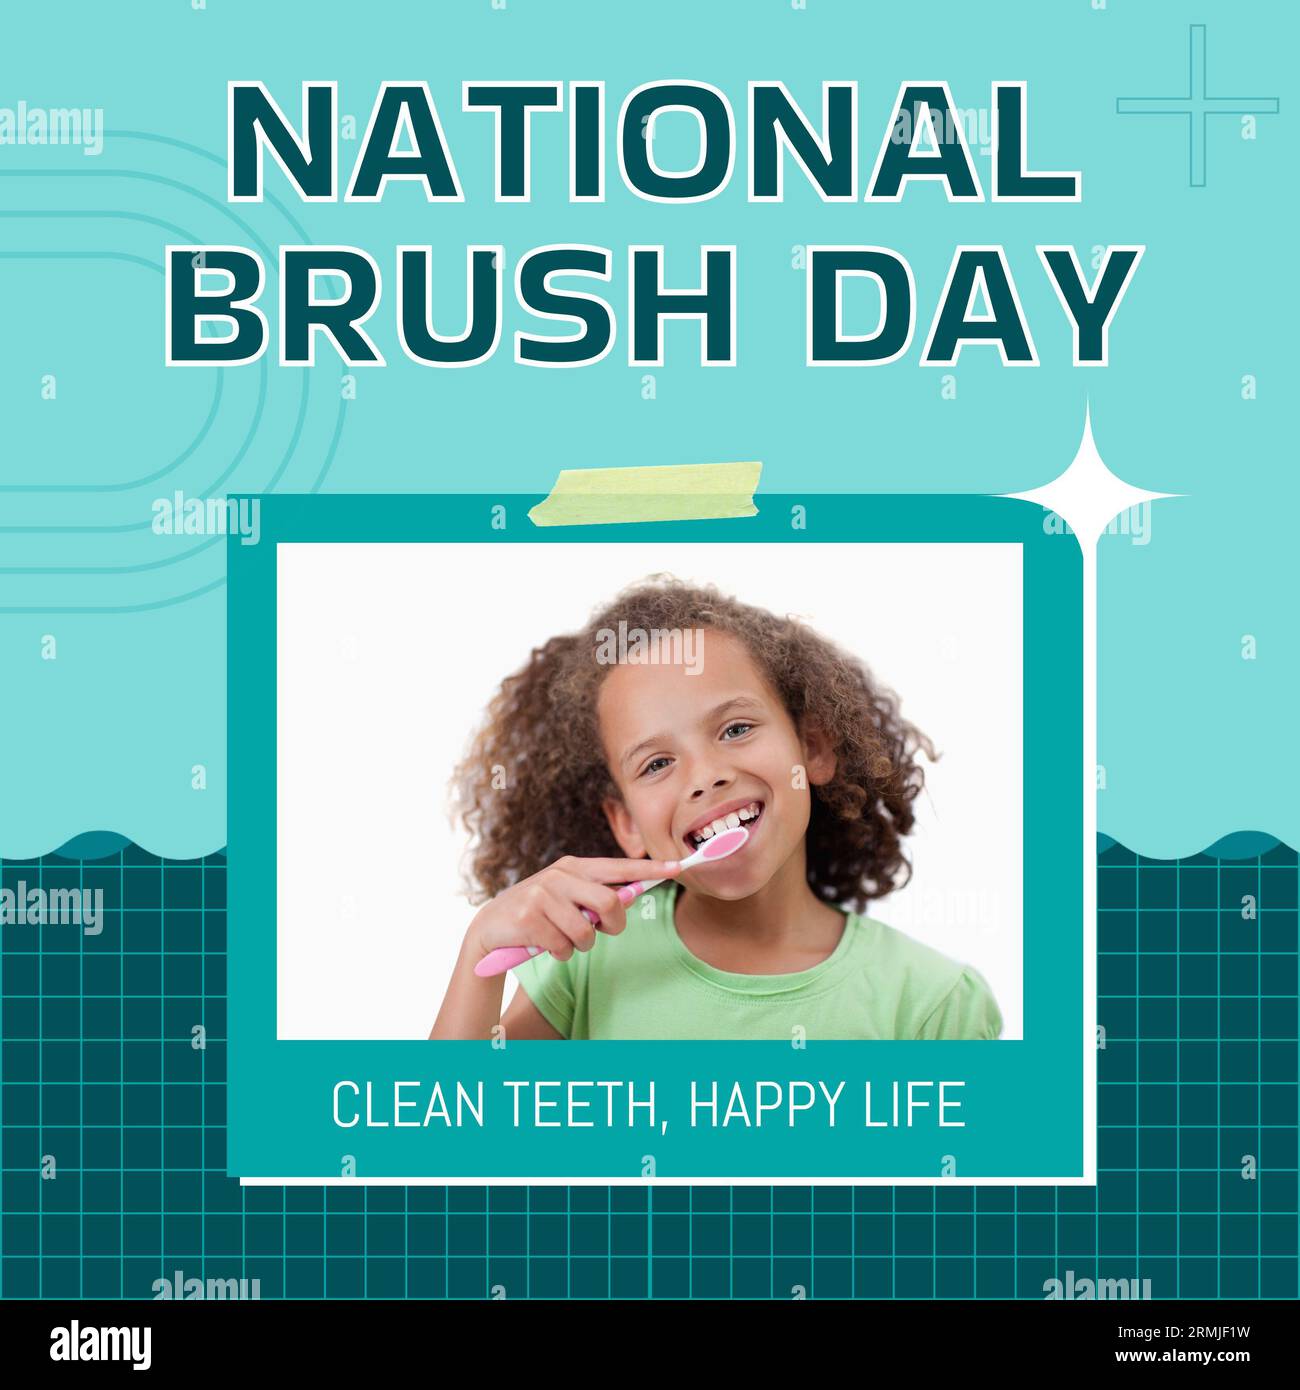 Composite of biracial girl brushing teeth and national brush day, clean teeth, happy life text Stock Photo